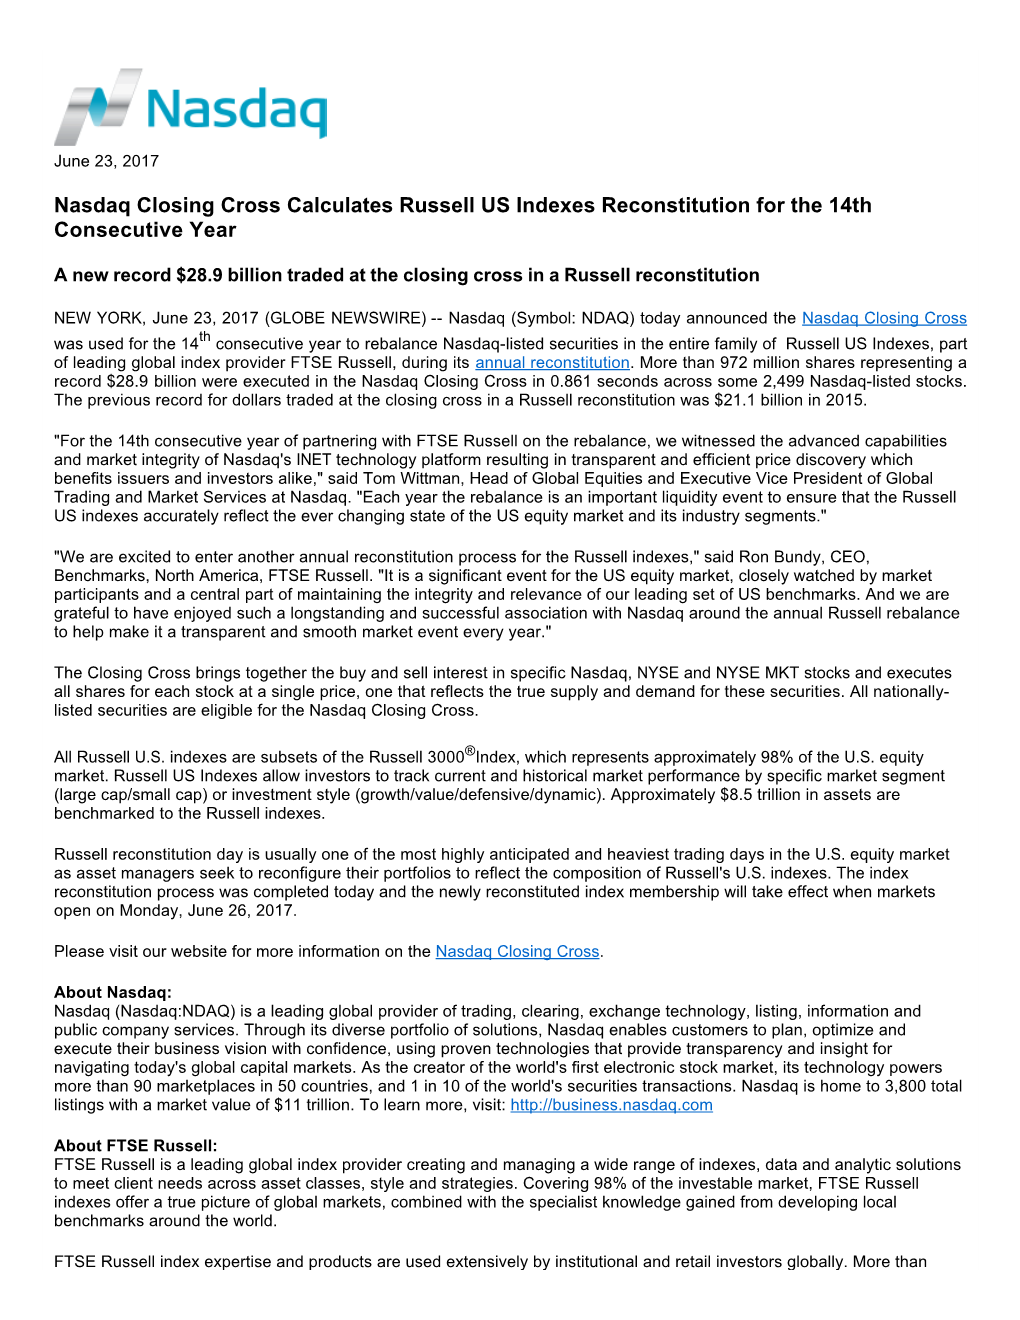 Nasdaq Closing Cross Calculates Russell US Indexes Reconstitution for the 14Th Consecutive Year